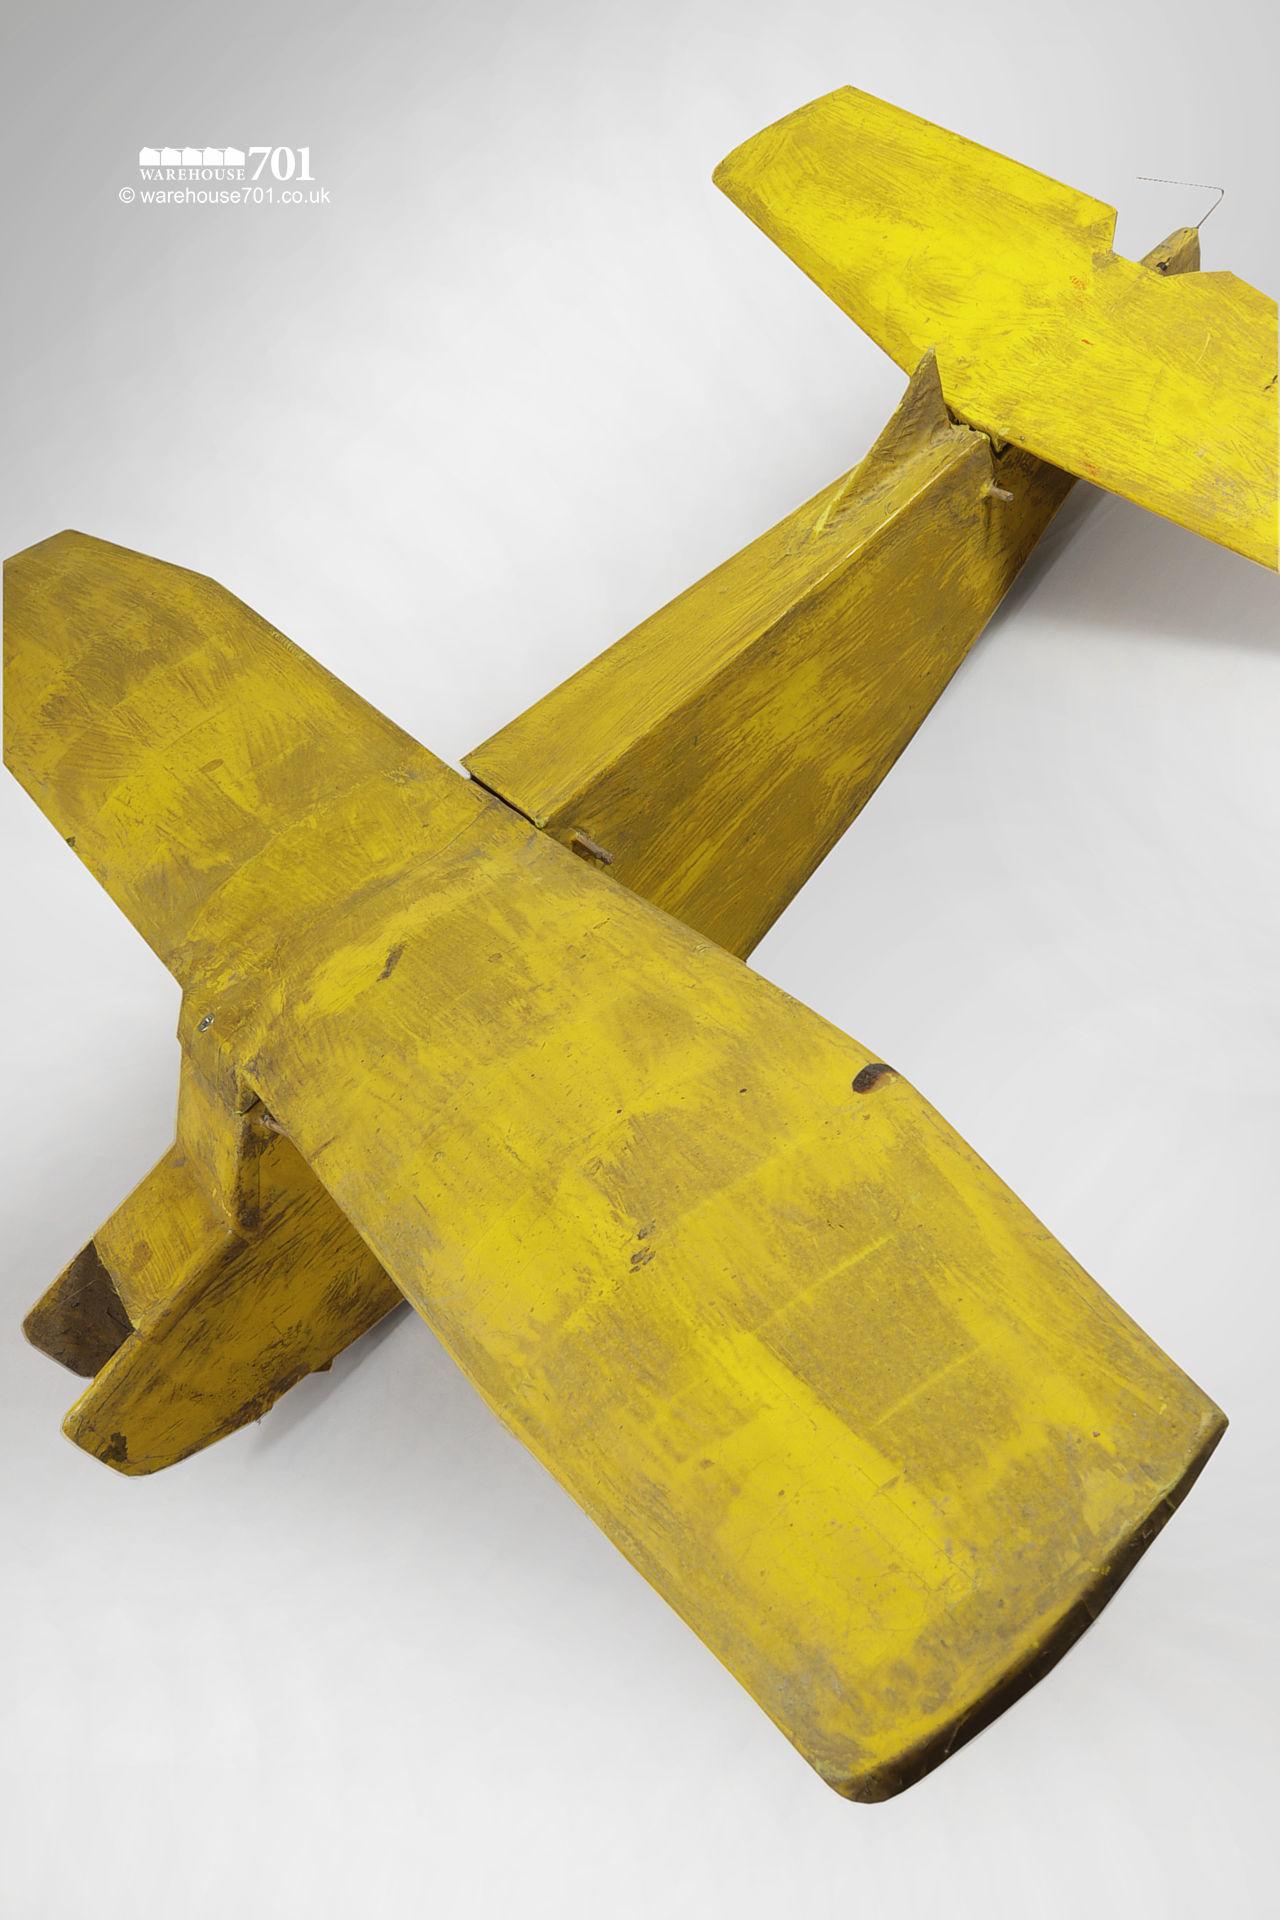 Old Control-Line and Other Model Aeroplanes for Display or Repair #4